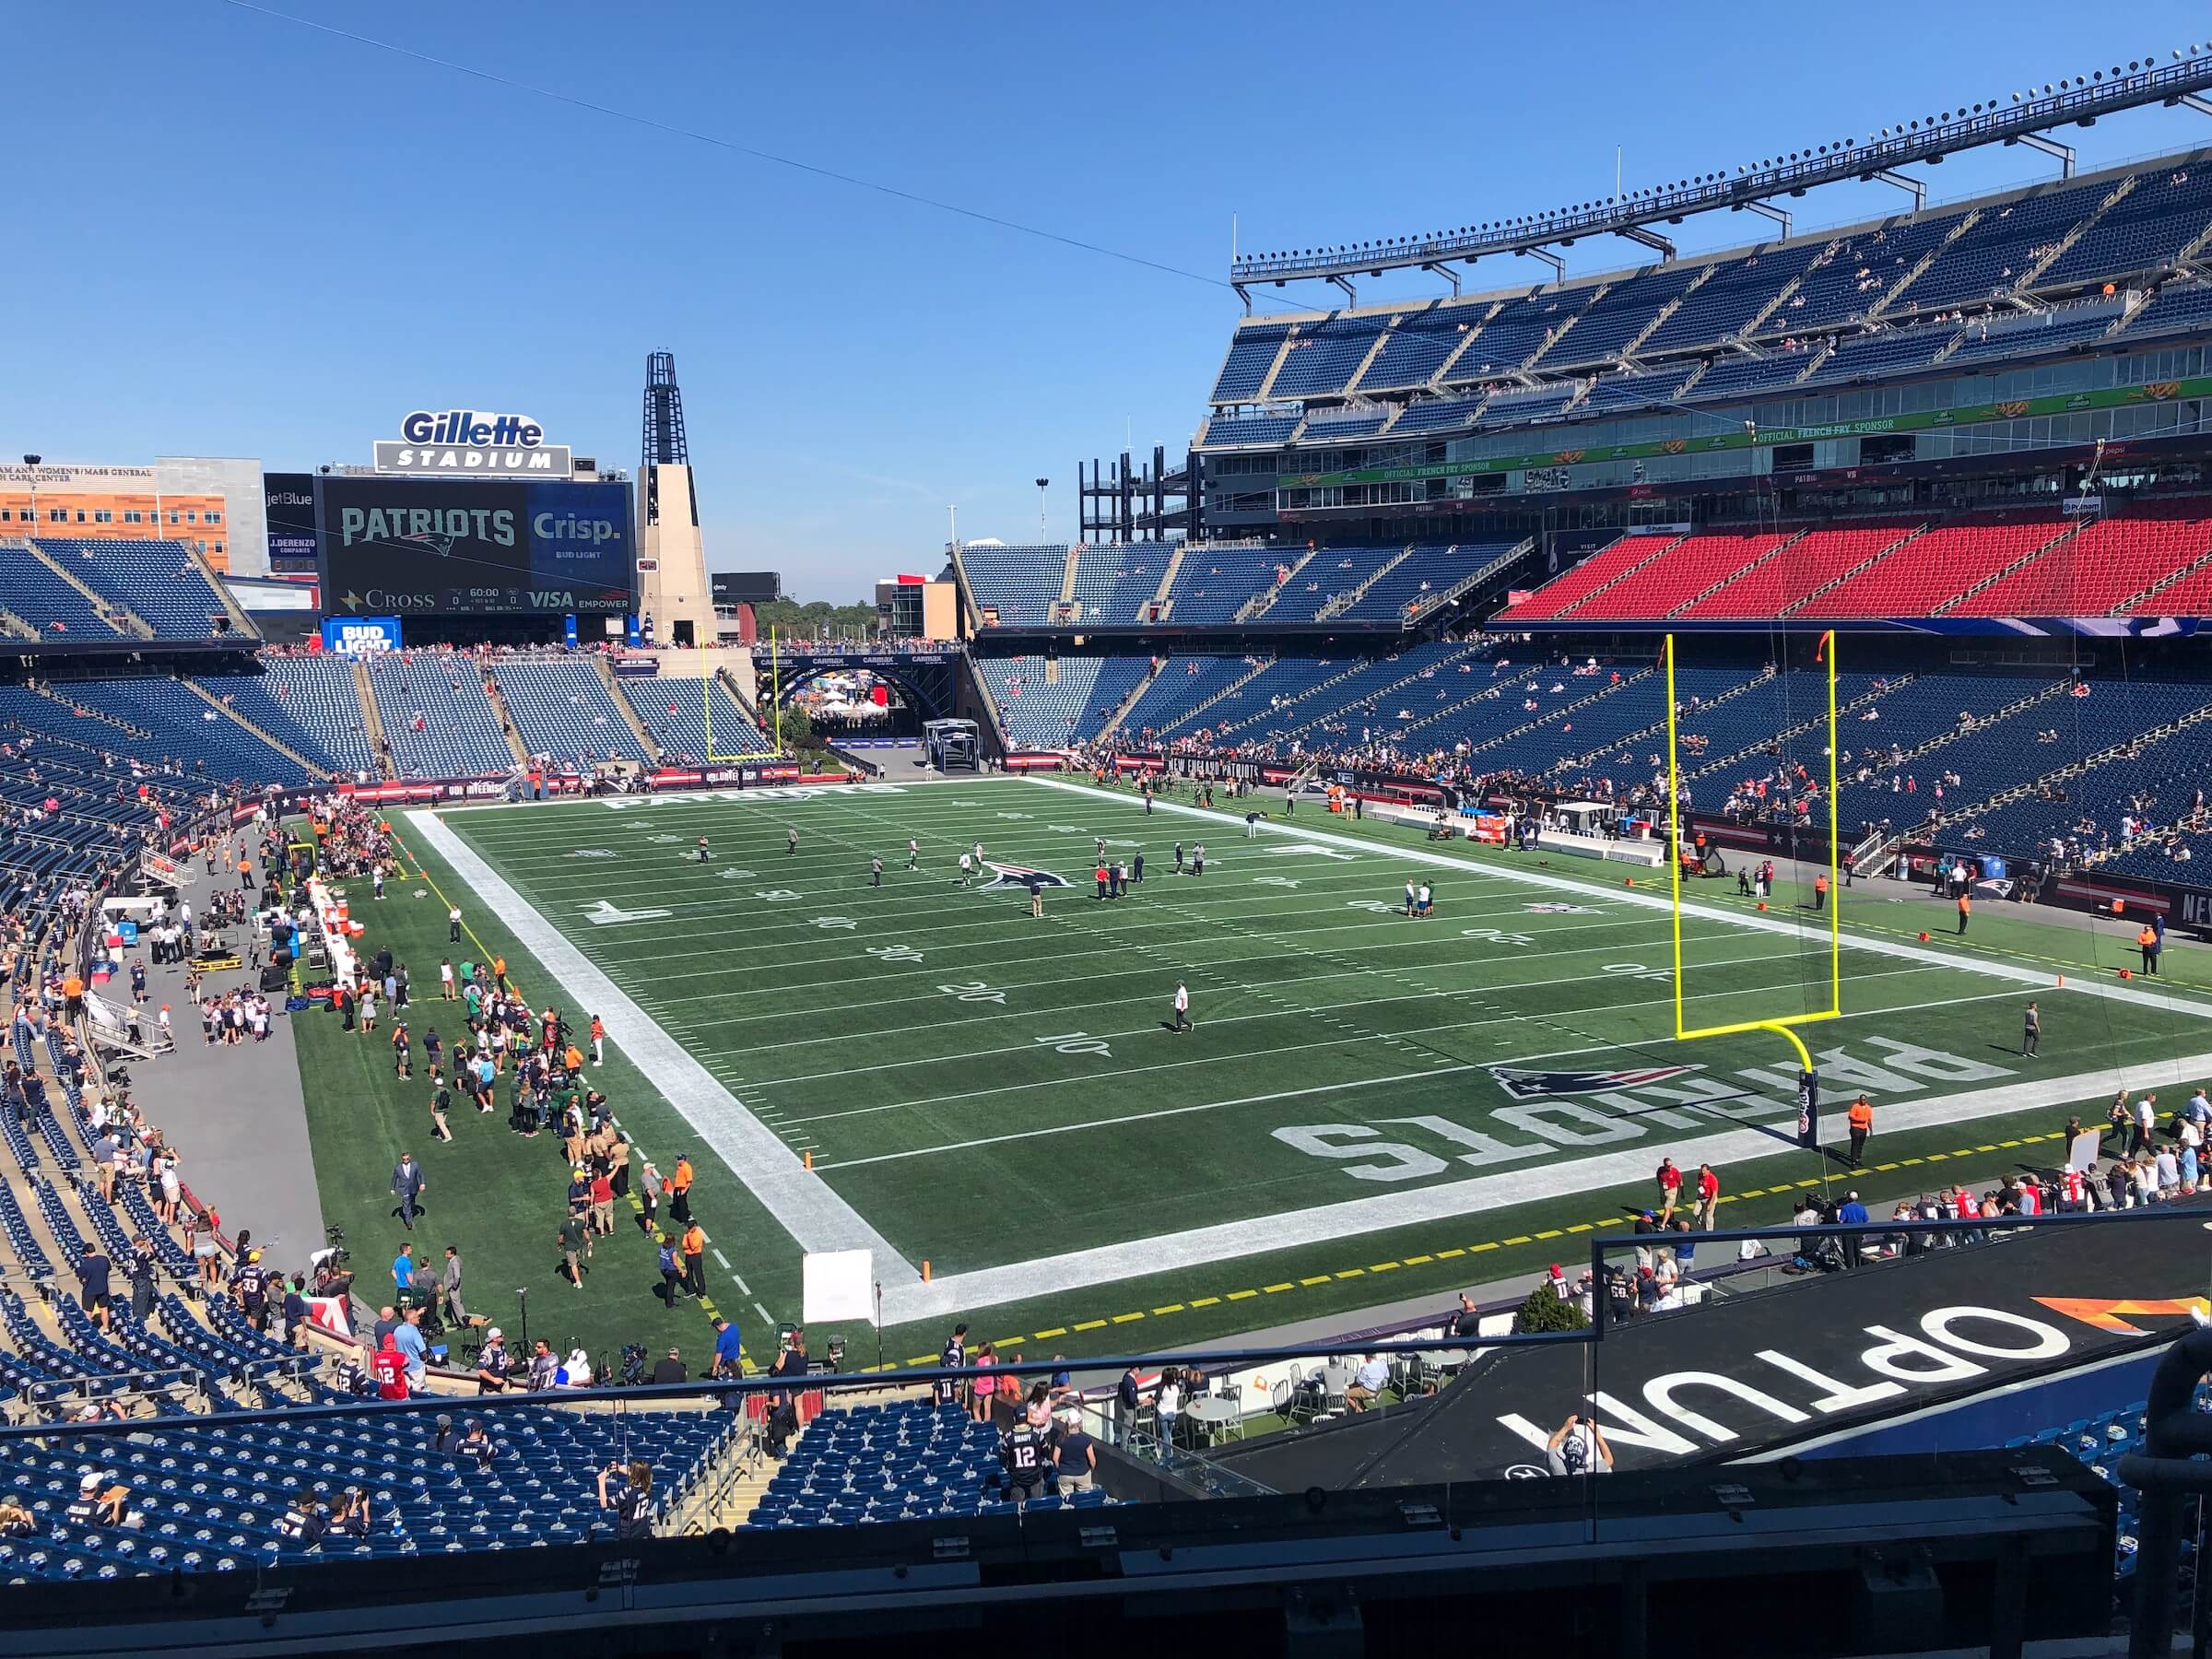 Step Inside Gillette Stadium Home of the New England Patriots